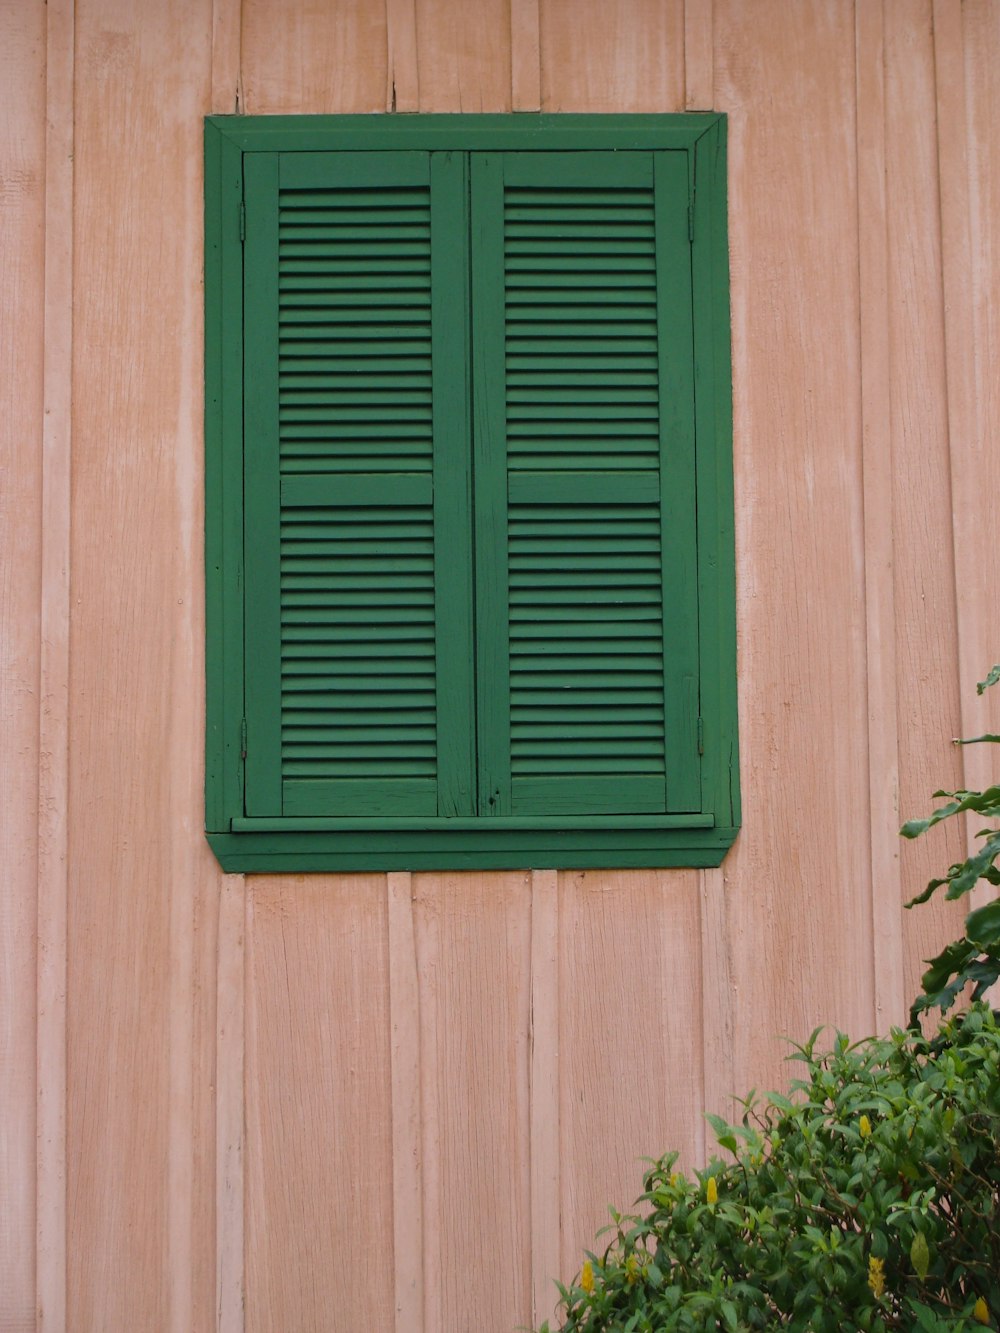 green window blinds on pink wooden wall